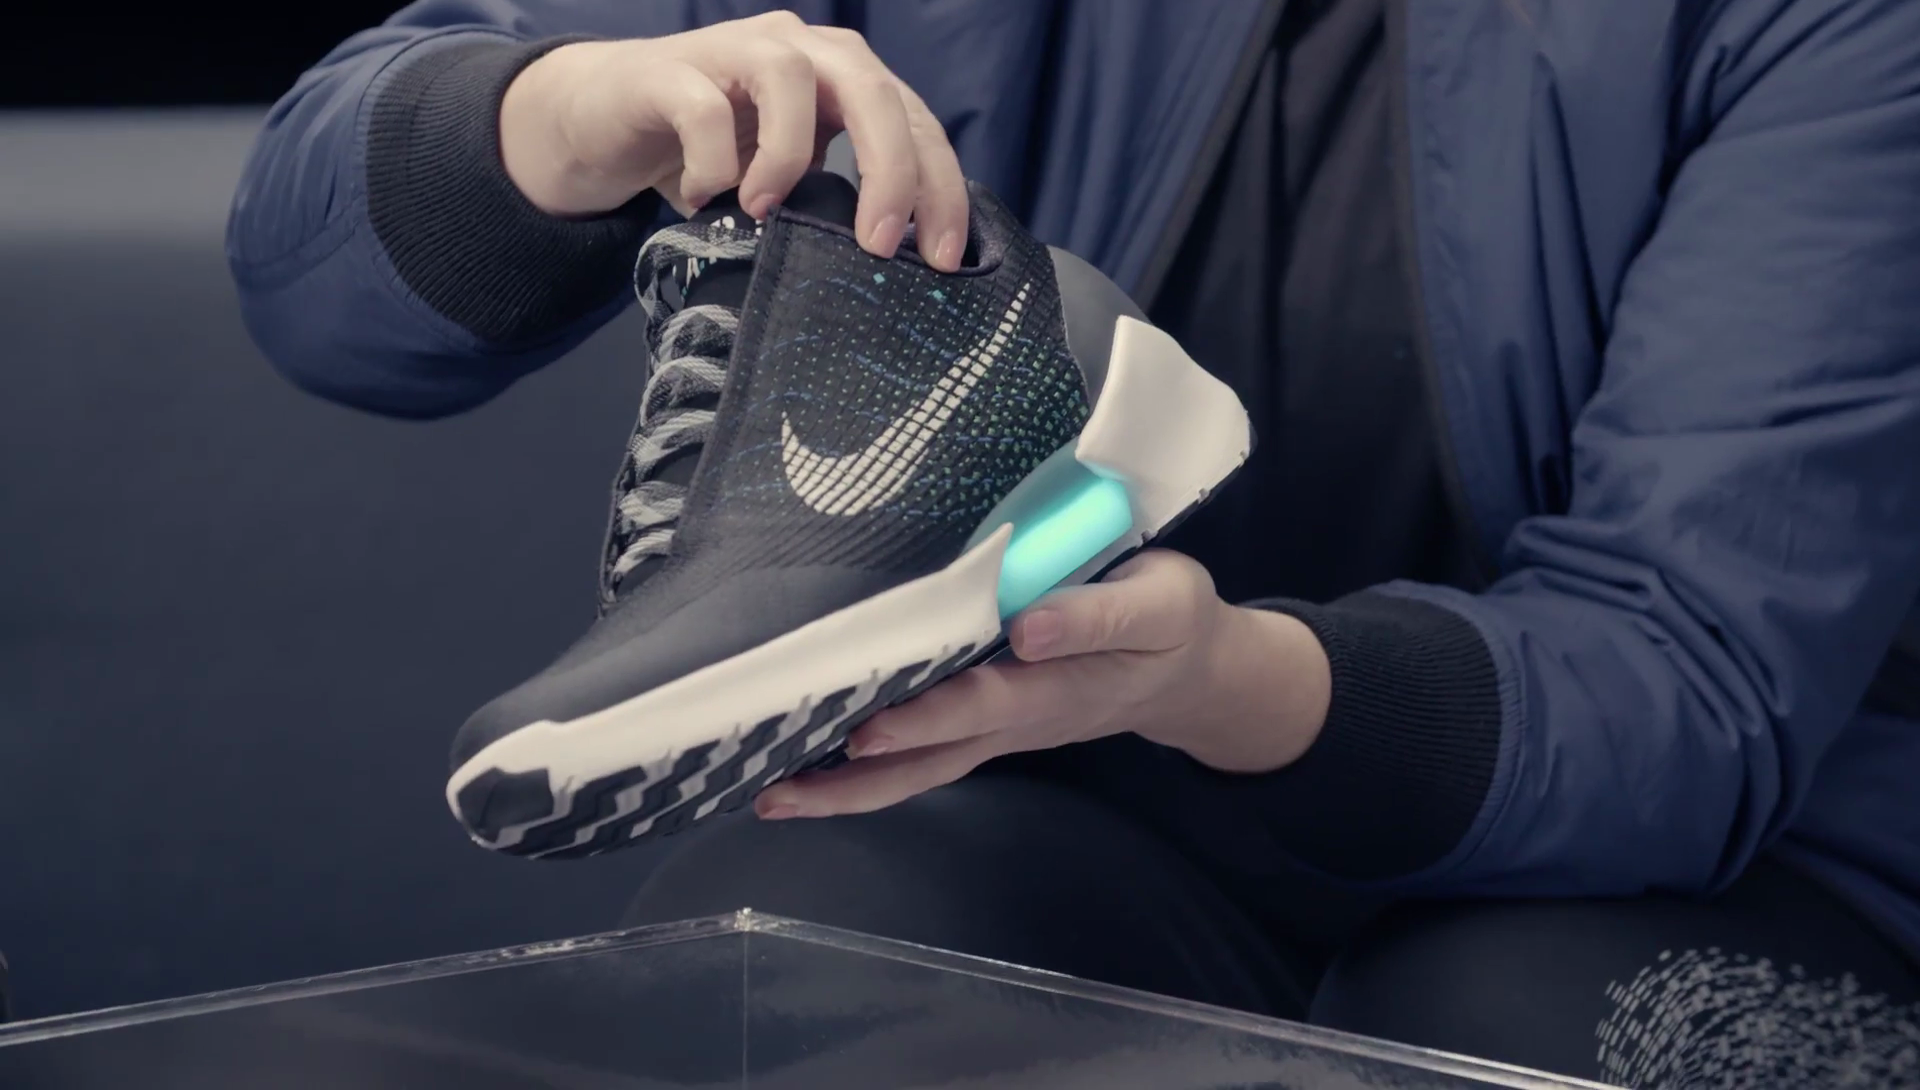 Nike's new shoes are self-lacing and must be charged like a